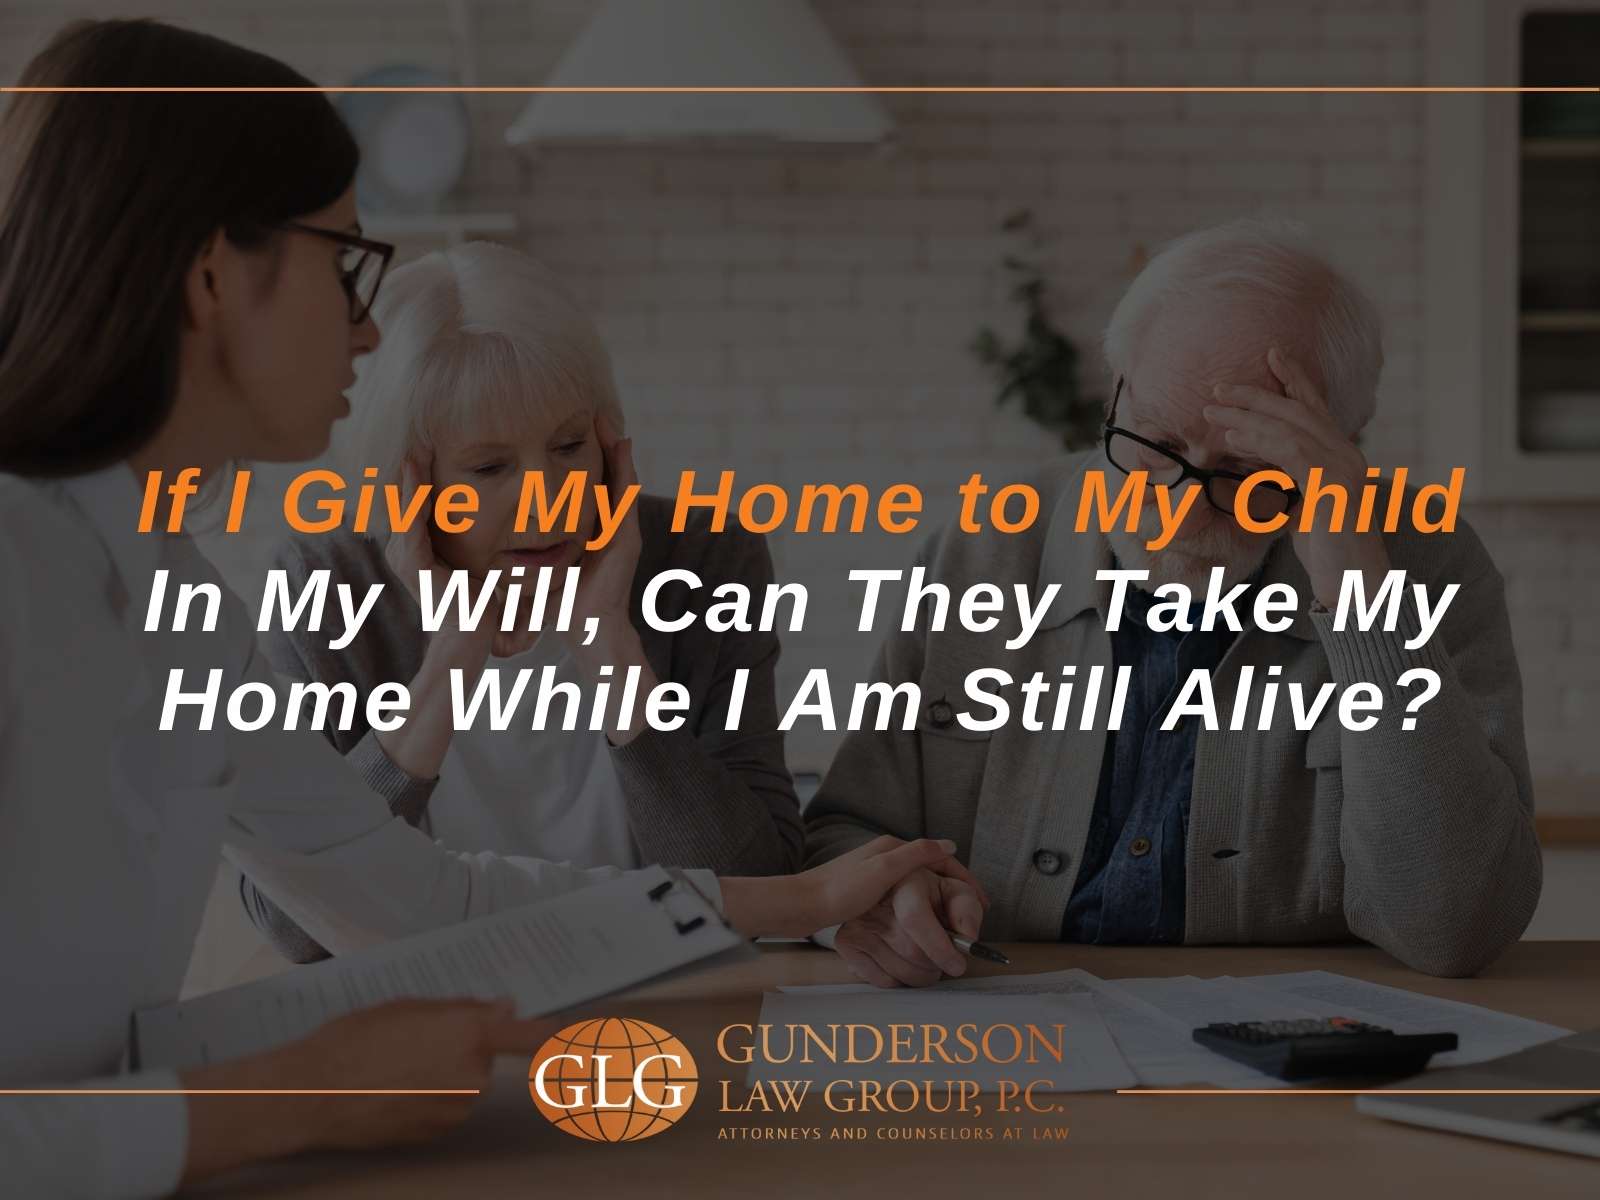 What Could Happen If I Give My Home To My Child In My Will?